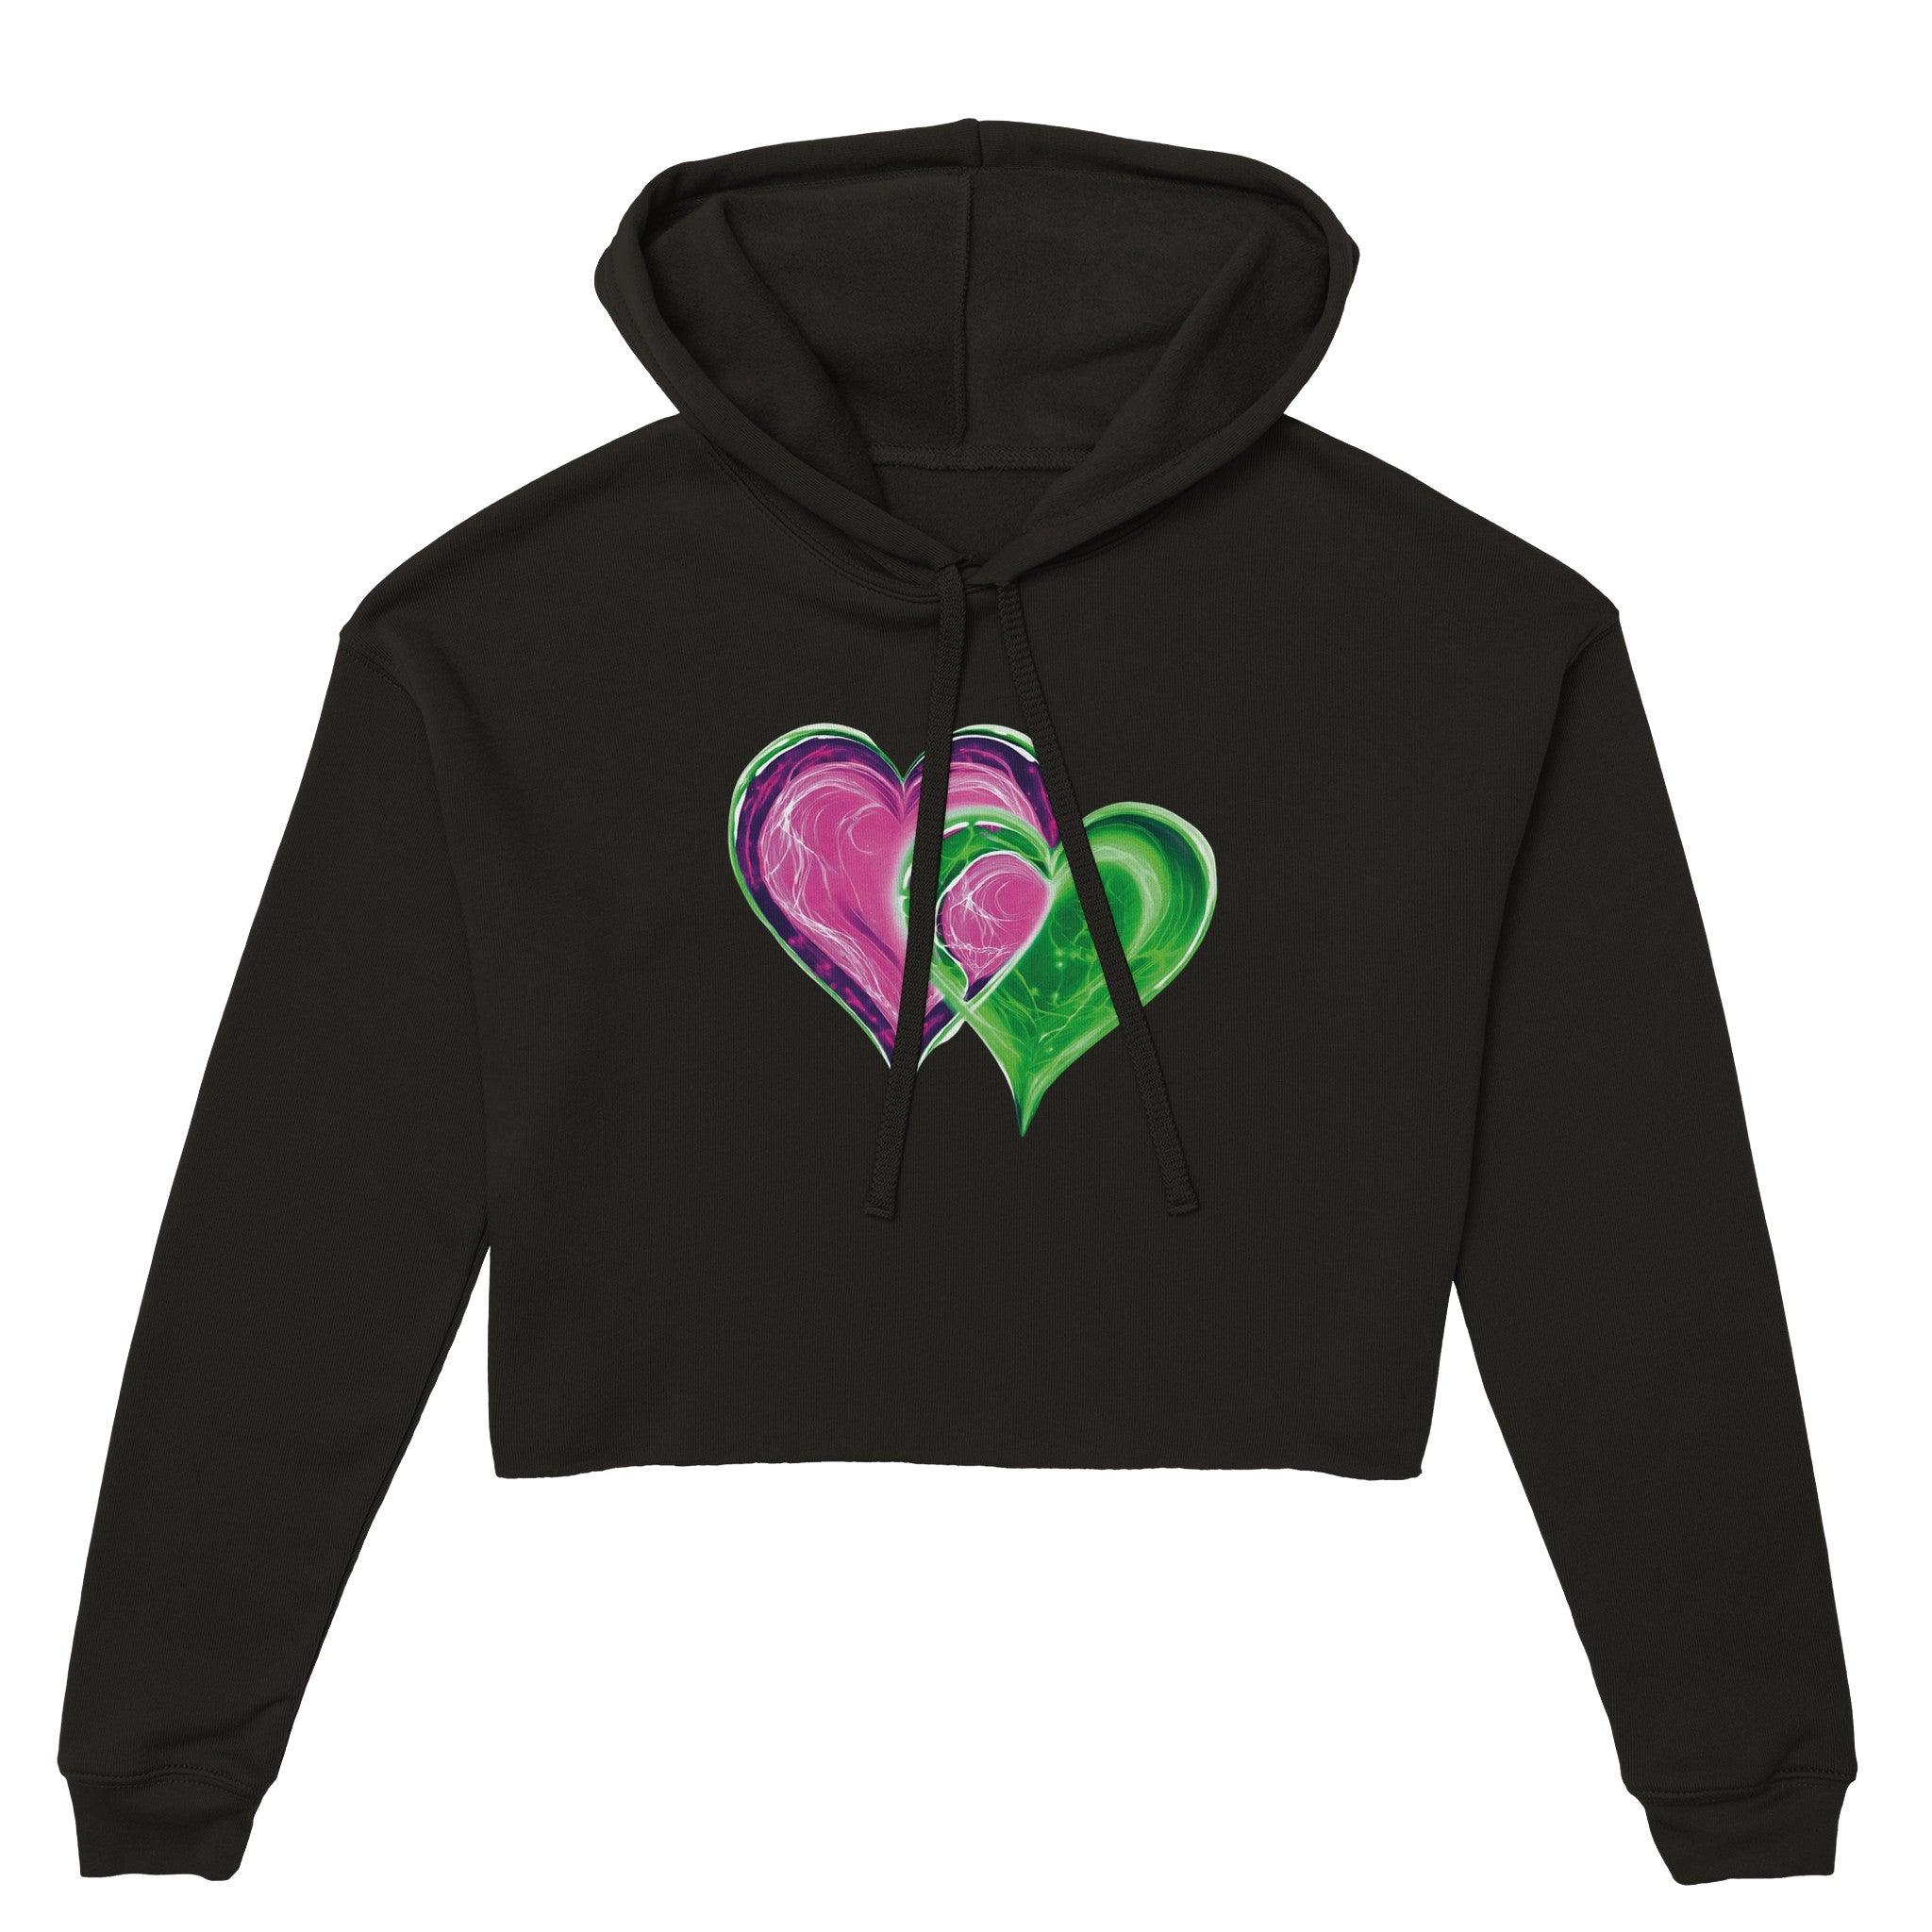 'Love' Cropped Hoodie - POMA